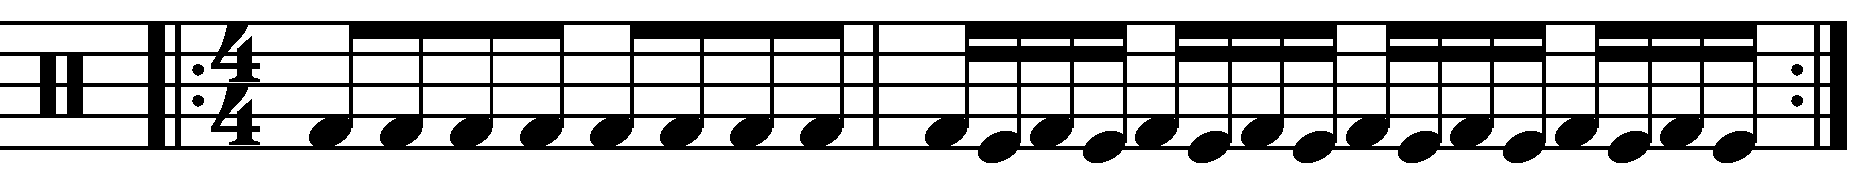 The eighth note to sixteenth note exercise.